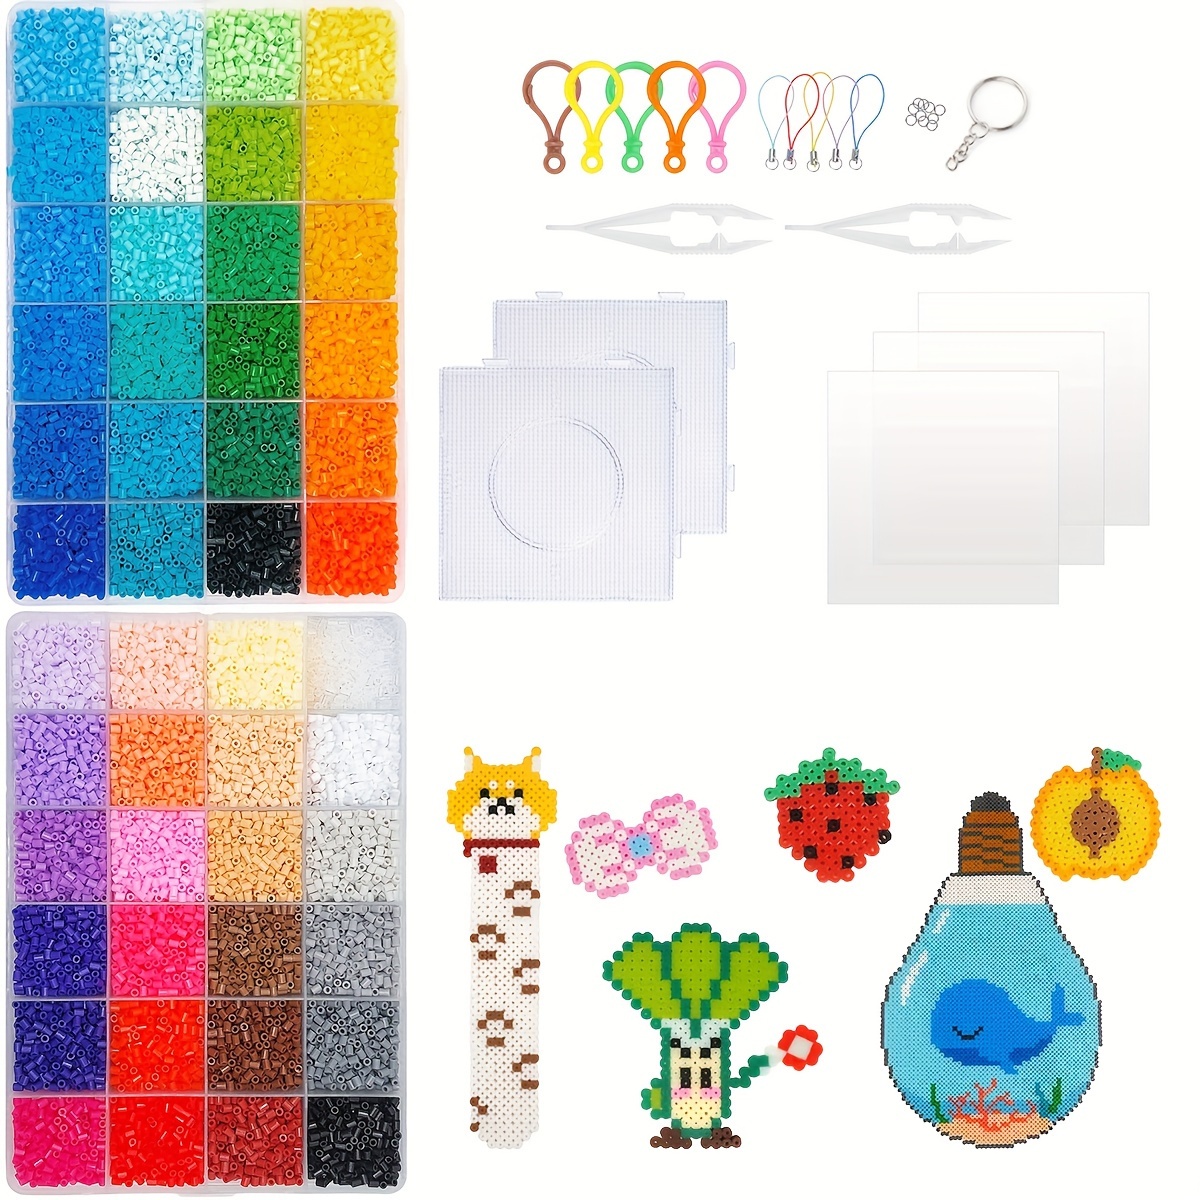 100g 2.6mm mini hama beads kids DIY Craft Puzzles mixed color fuse